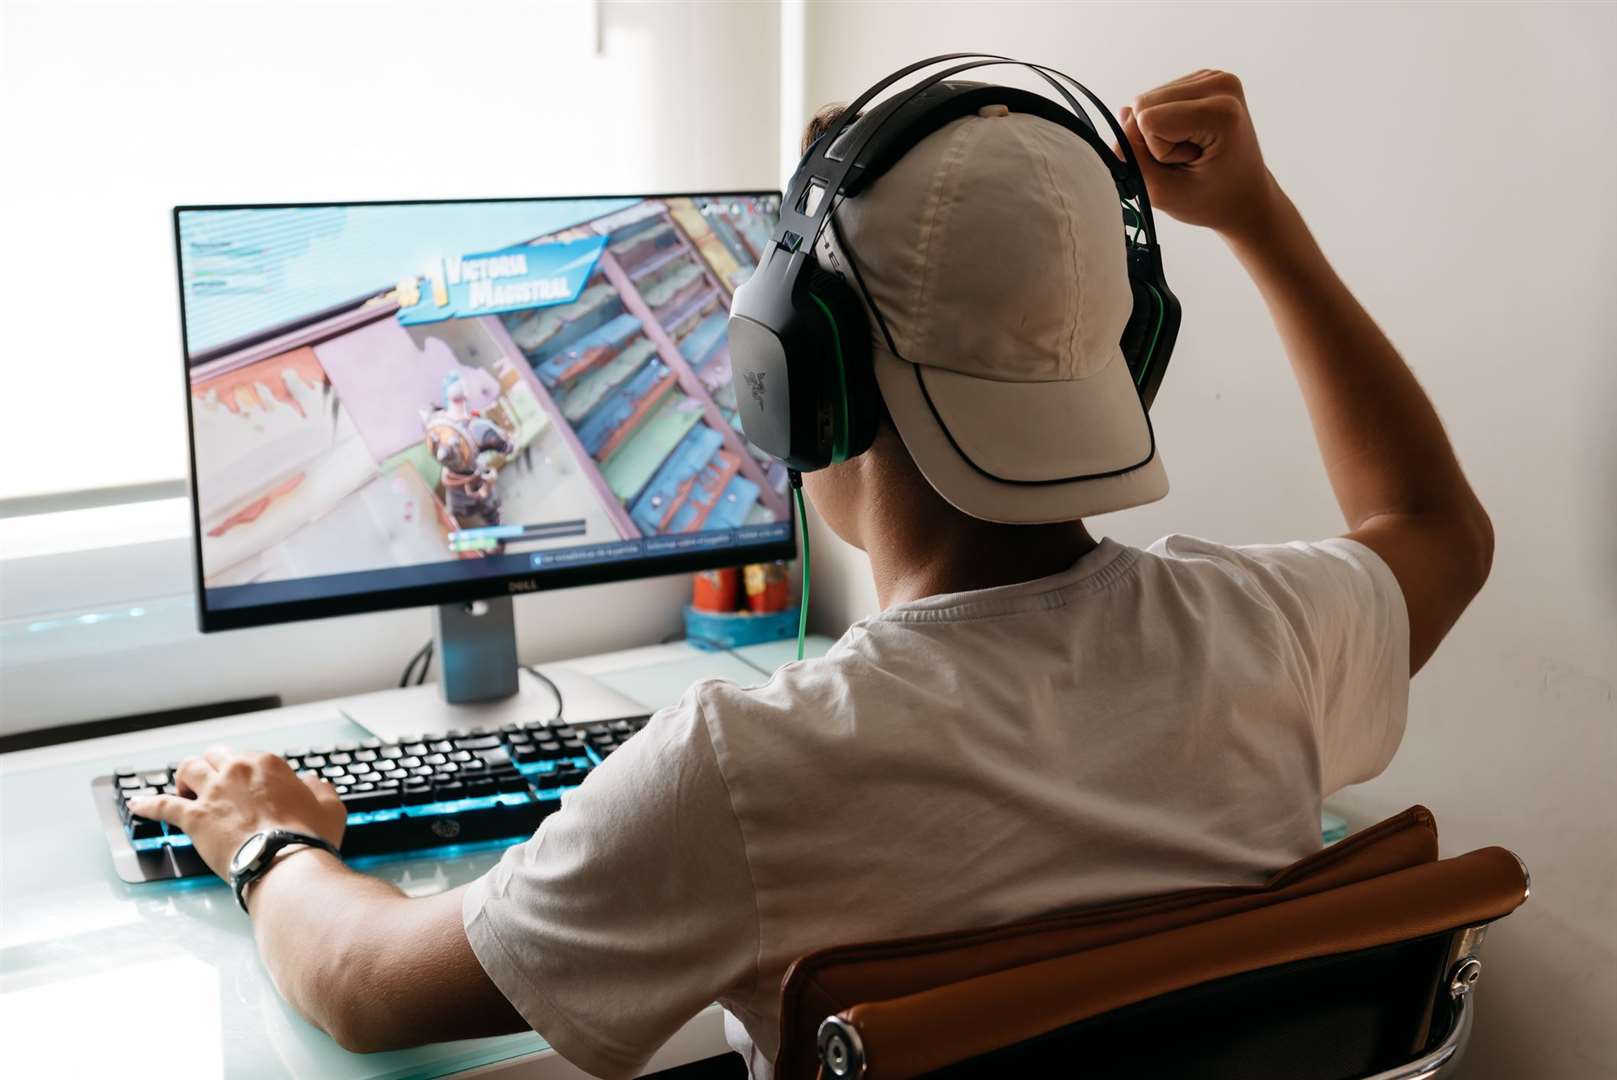 In 2019, the CMA launched a survey of online gaming subscriptions